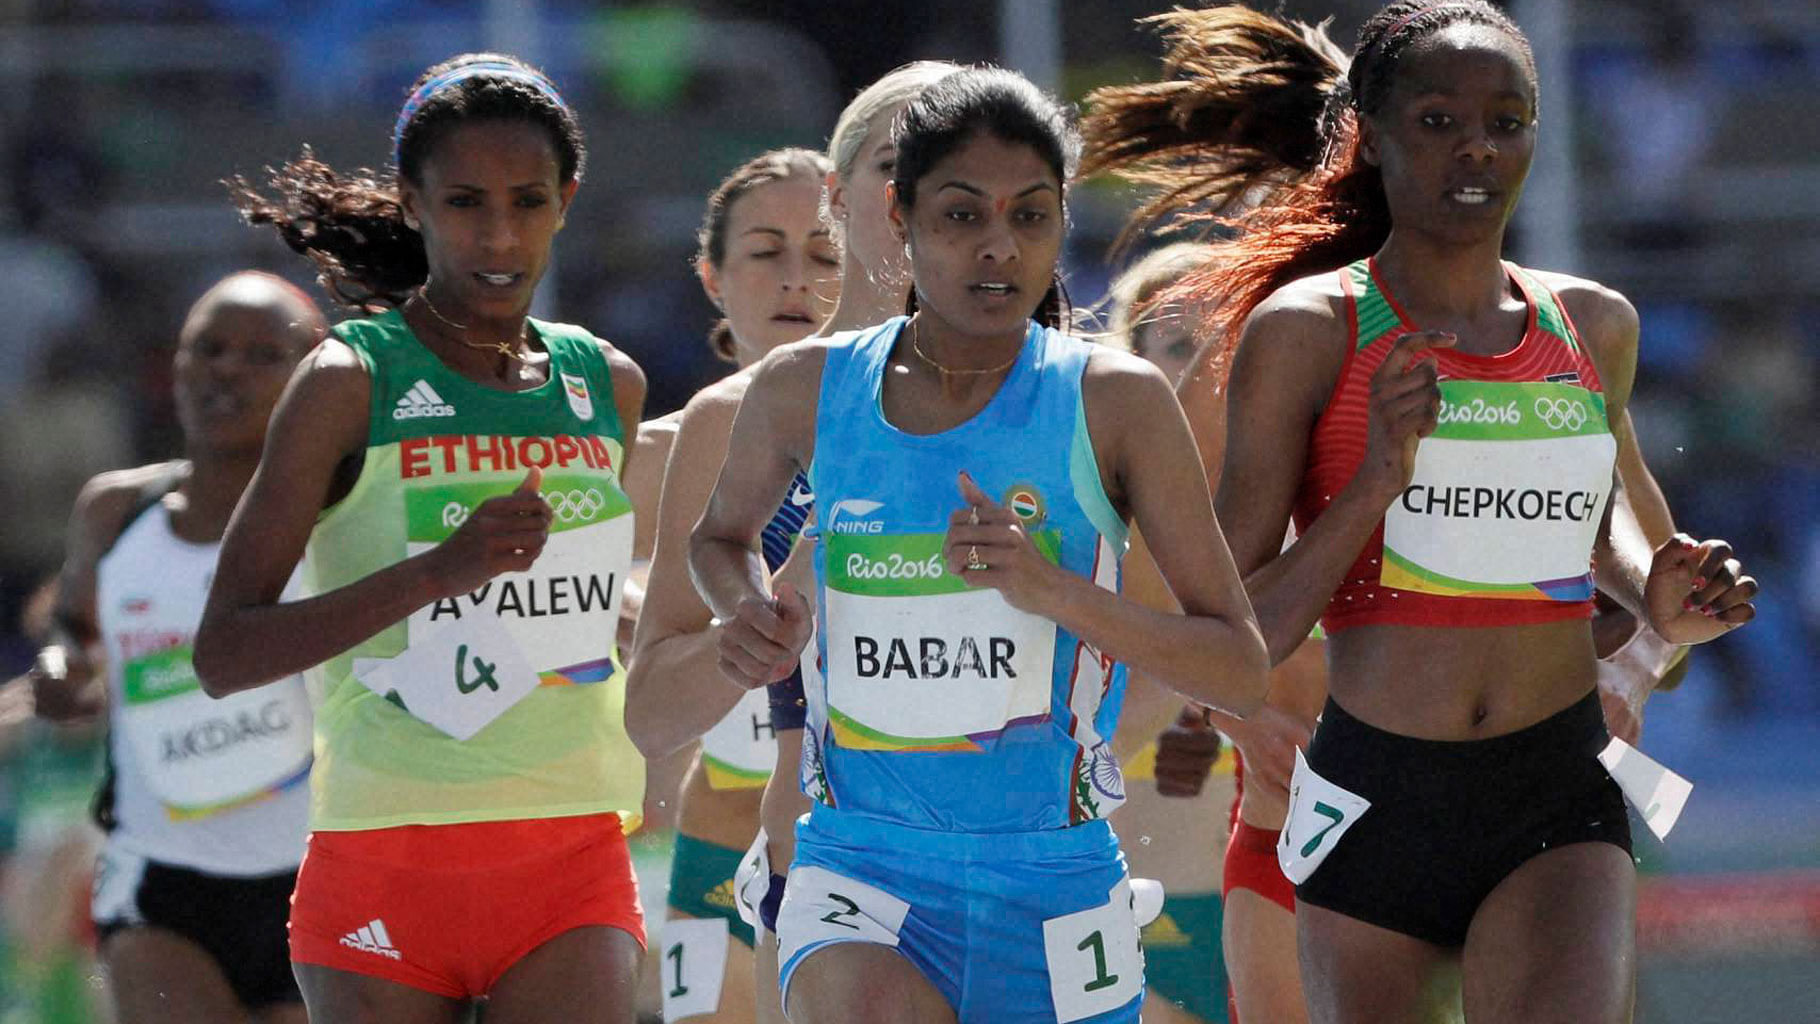 Lalita Babar in action during the 3000m steeplechase final heats. (Photo: AP)